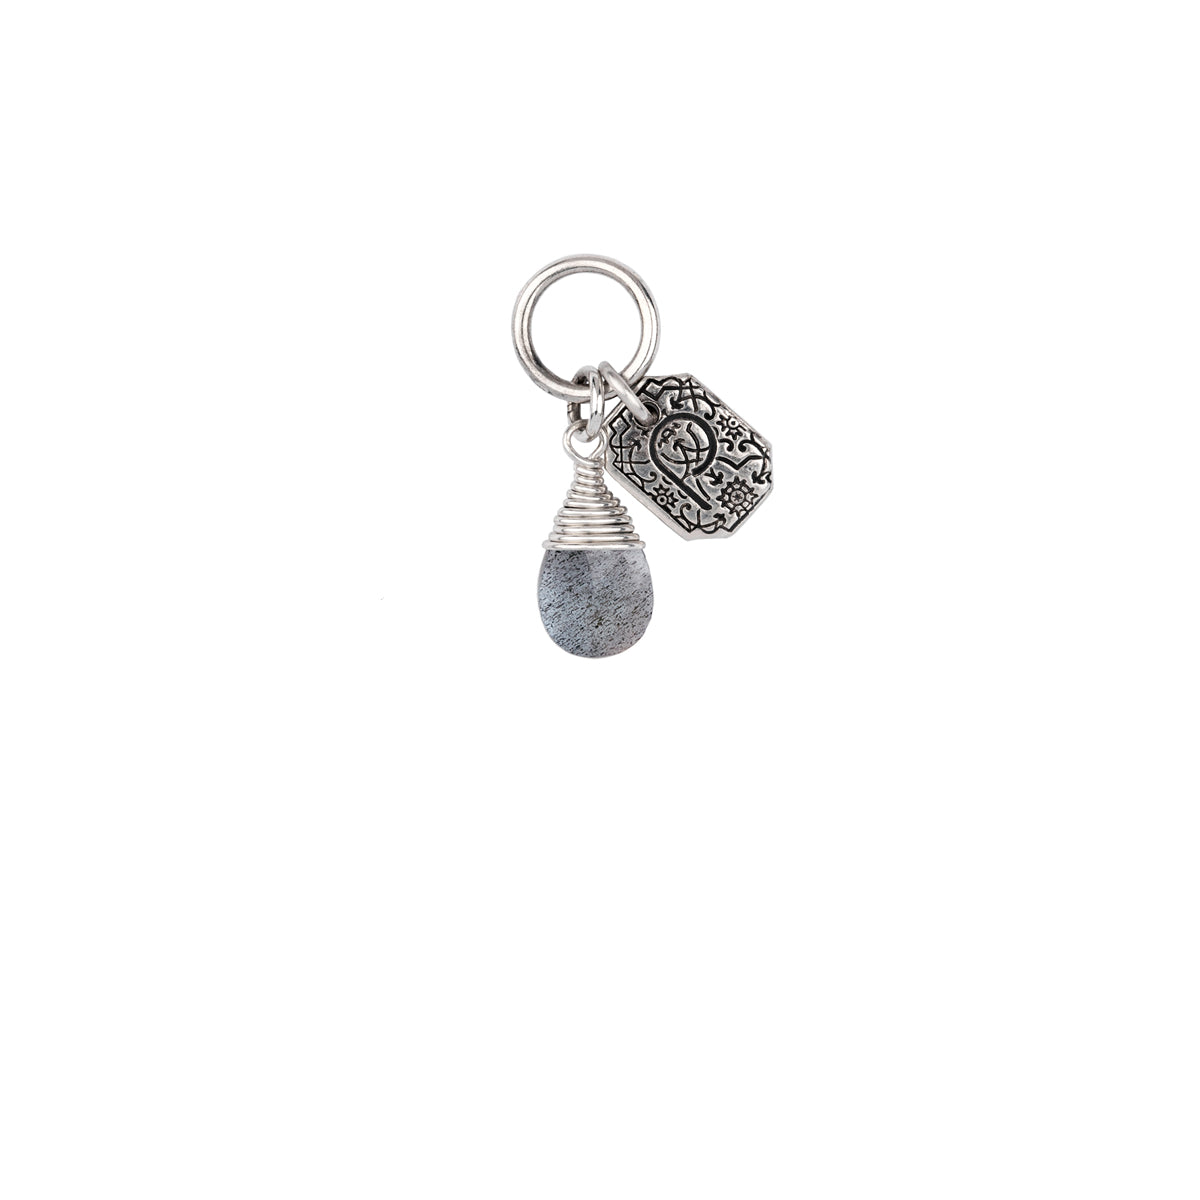 A sterling silver signature attraction charm capped with a Labradorite stone.